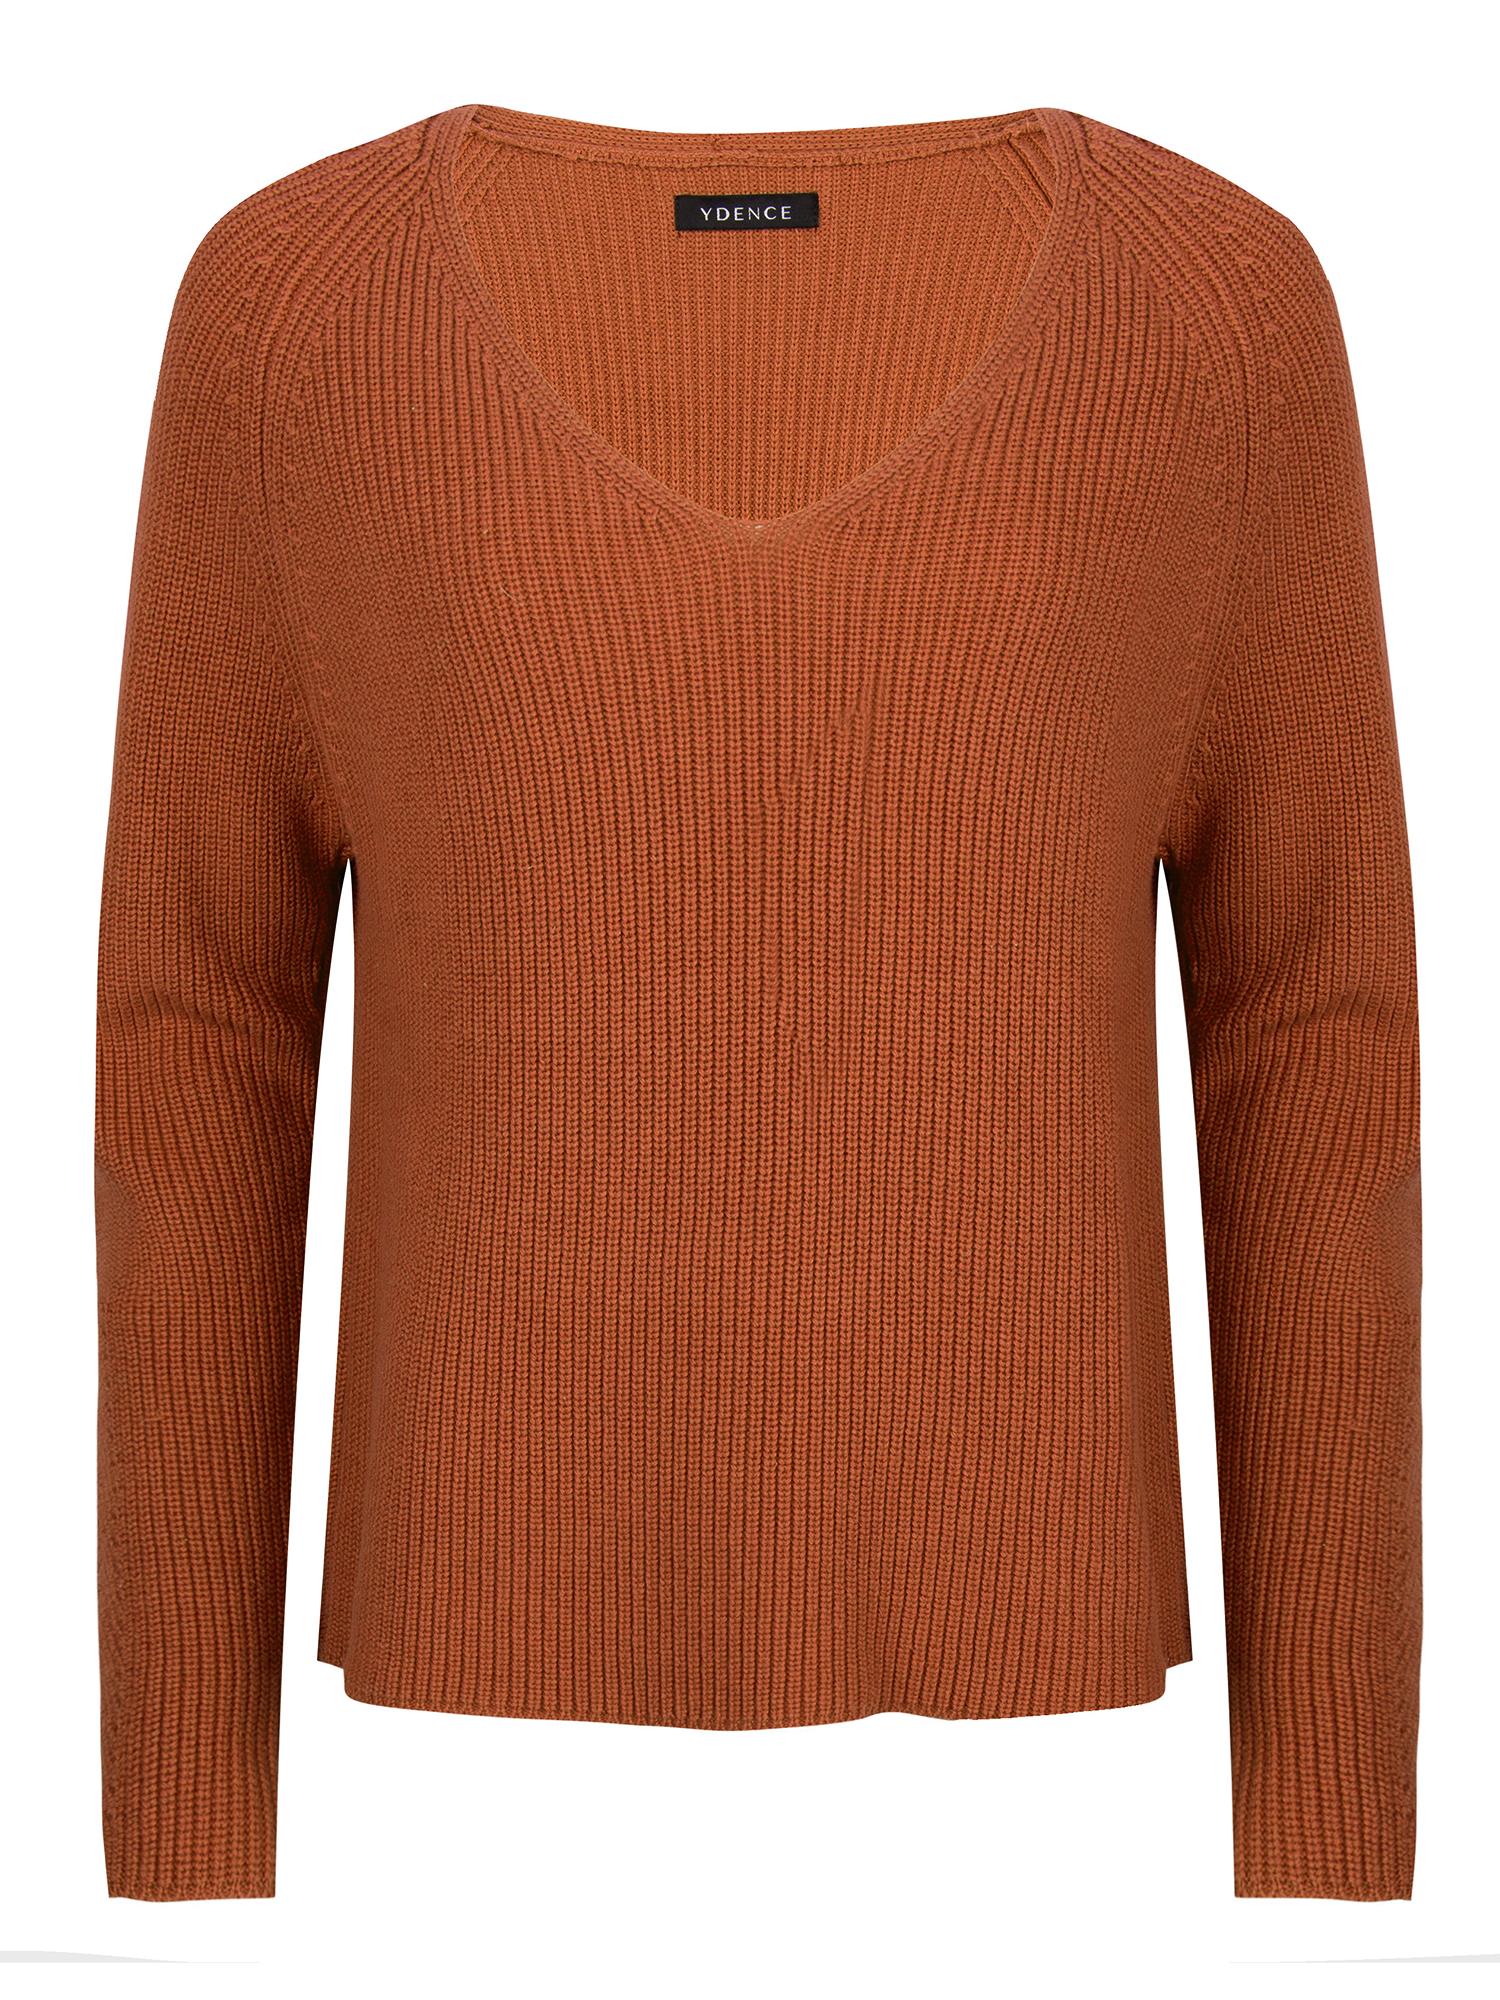 Ydence Knitted Sweater Tess Rust